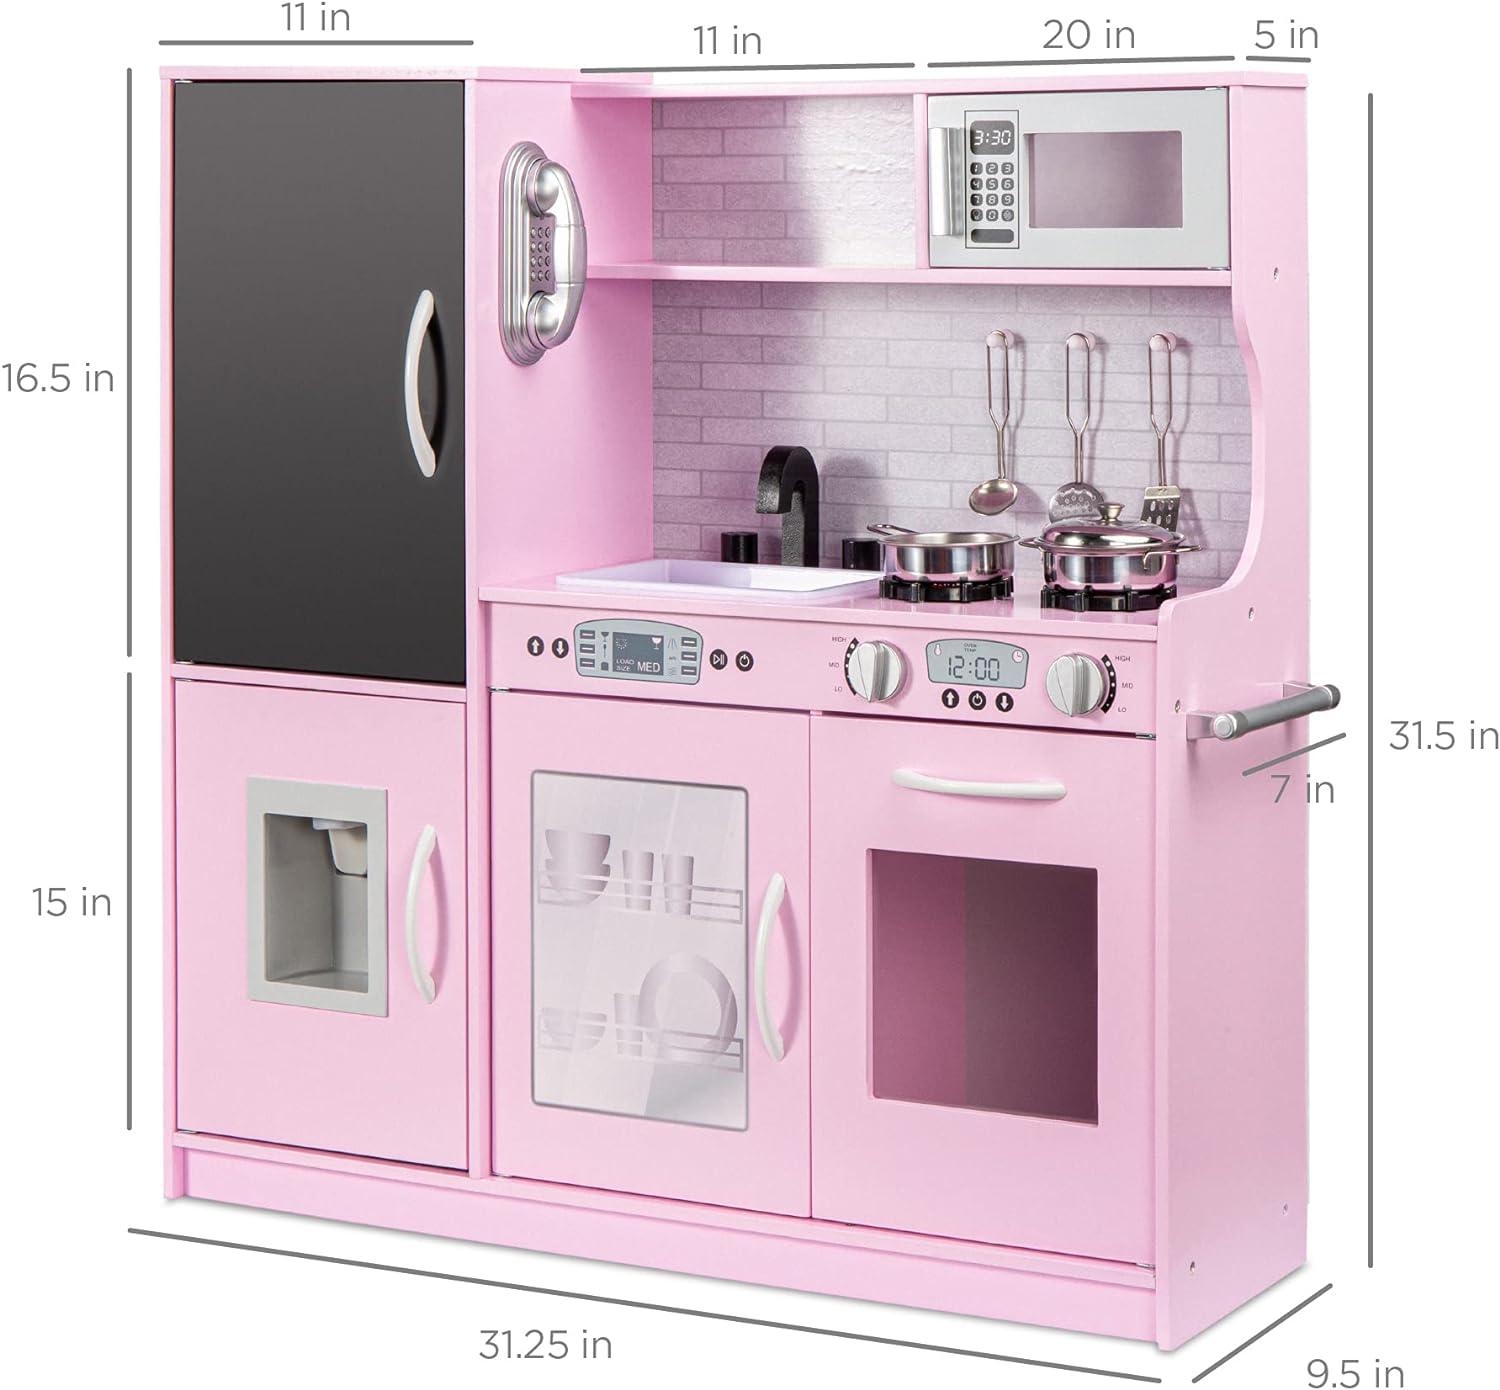 Best Choice Products Pretend Play Kitchen Wooden Toy Set for Kids w/Realistic Design, Telephone, Utensils, Oven, Microwave, Sink - Pink